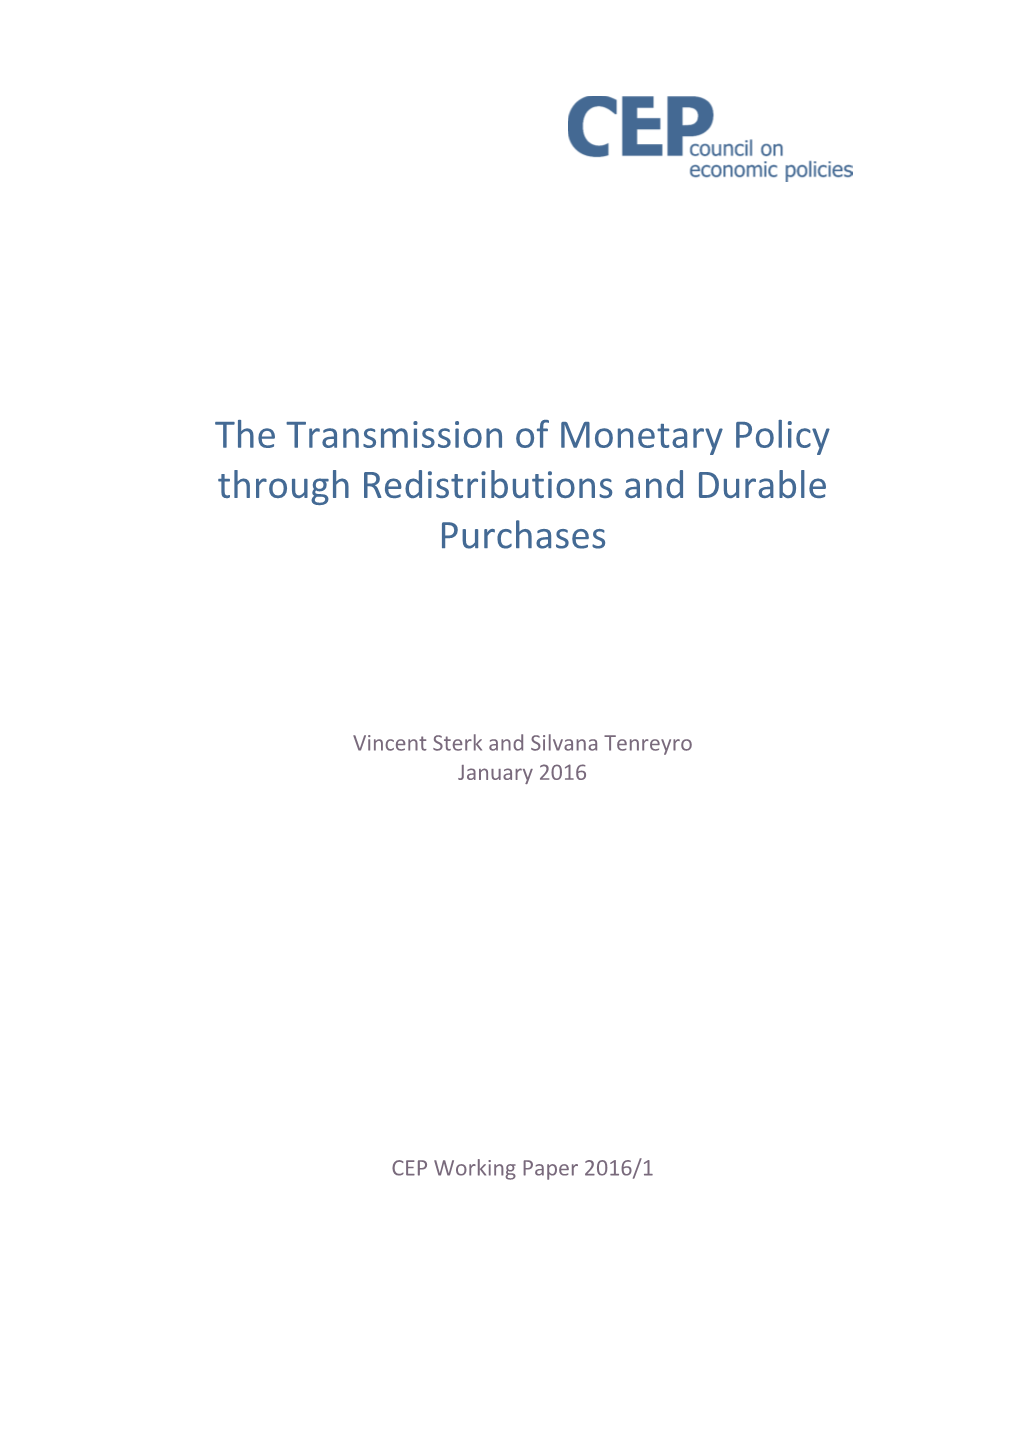 The Transmission of Monetary Policy Through Redistributions and Durable Purchases